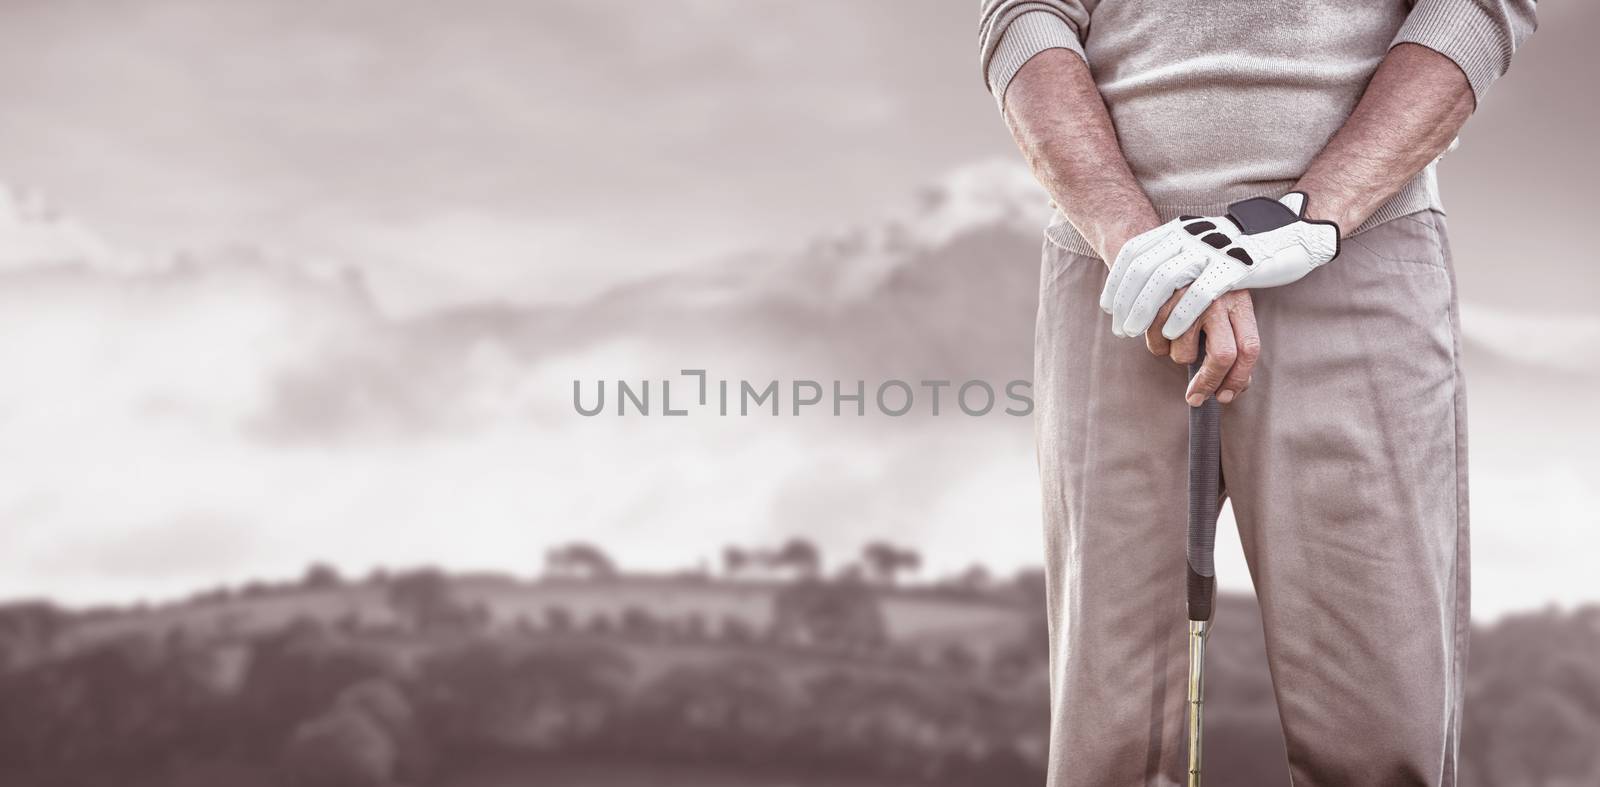 Golf player posing against country scene